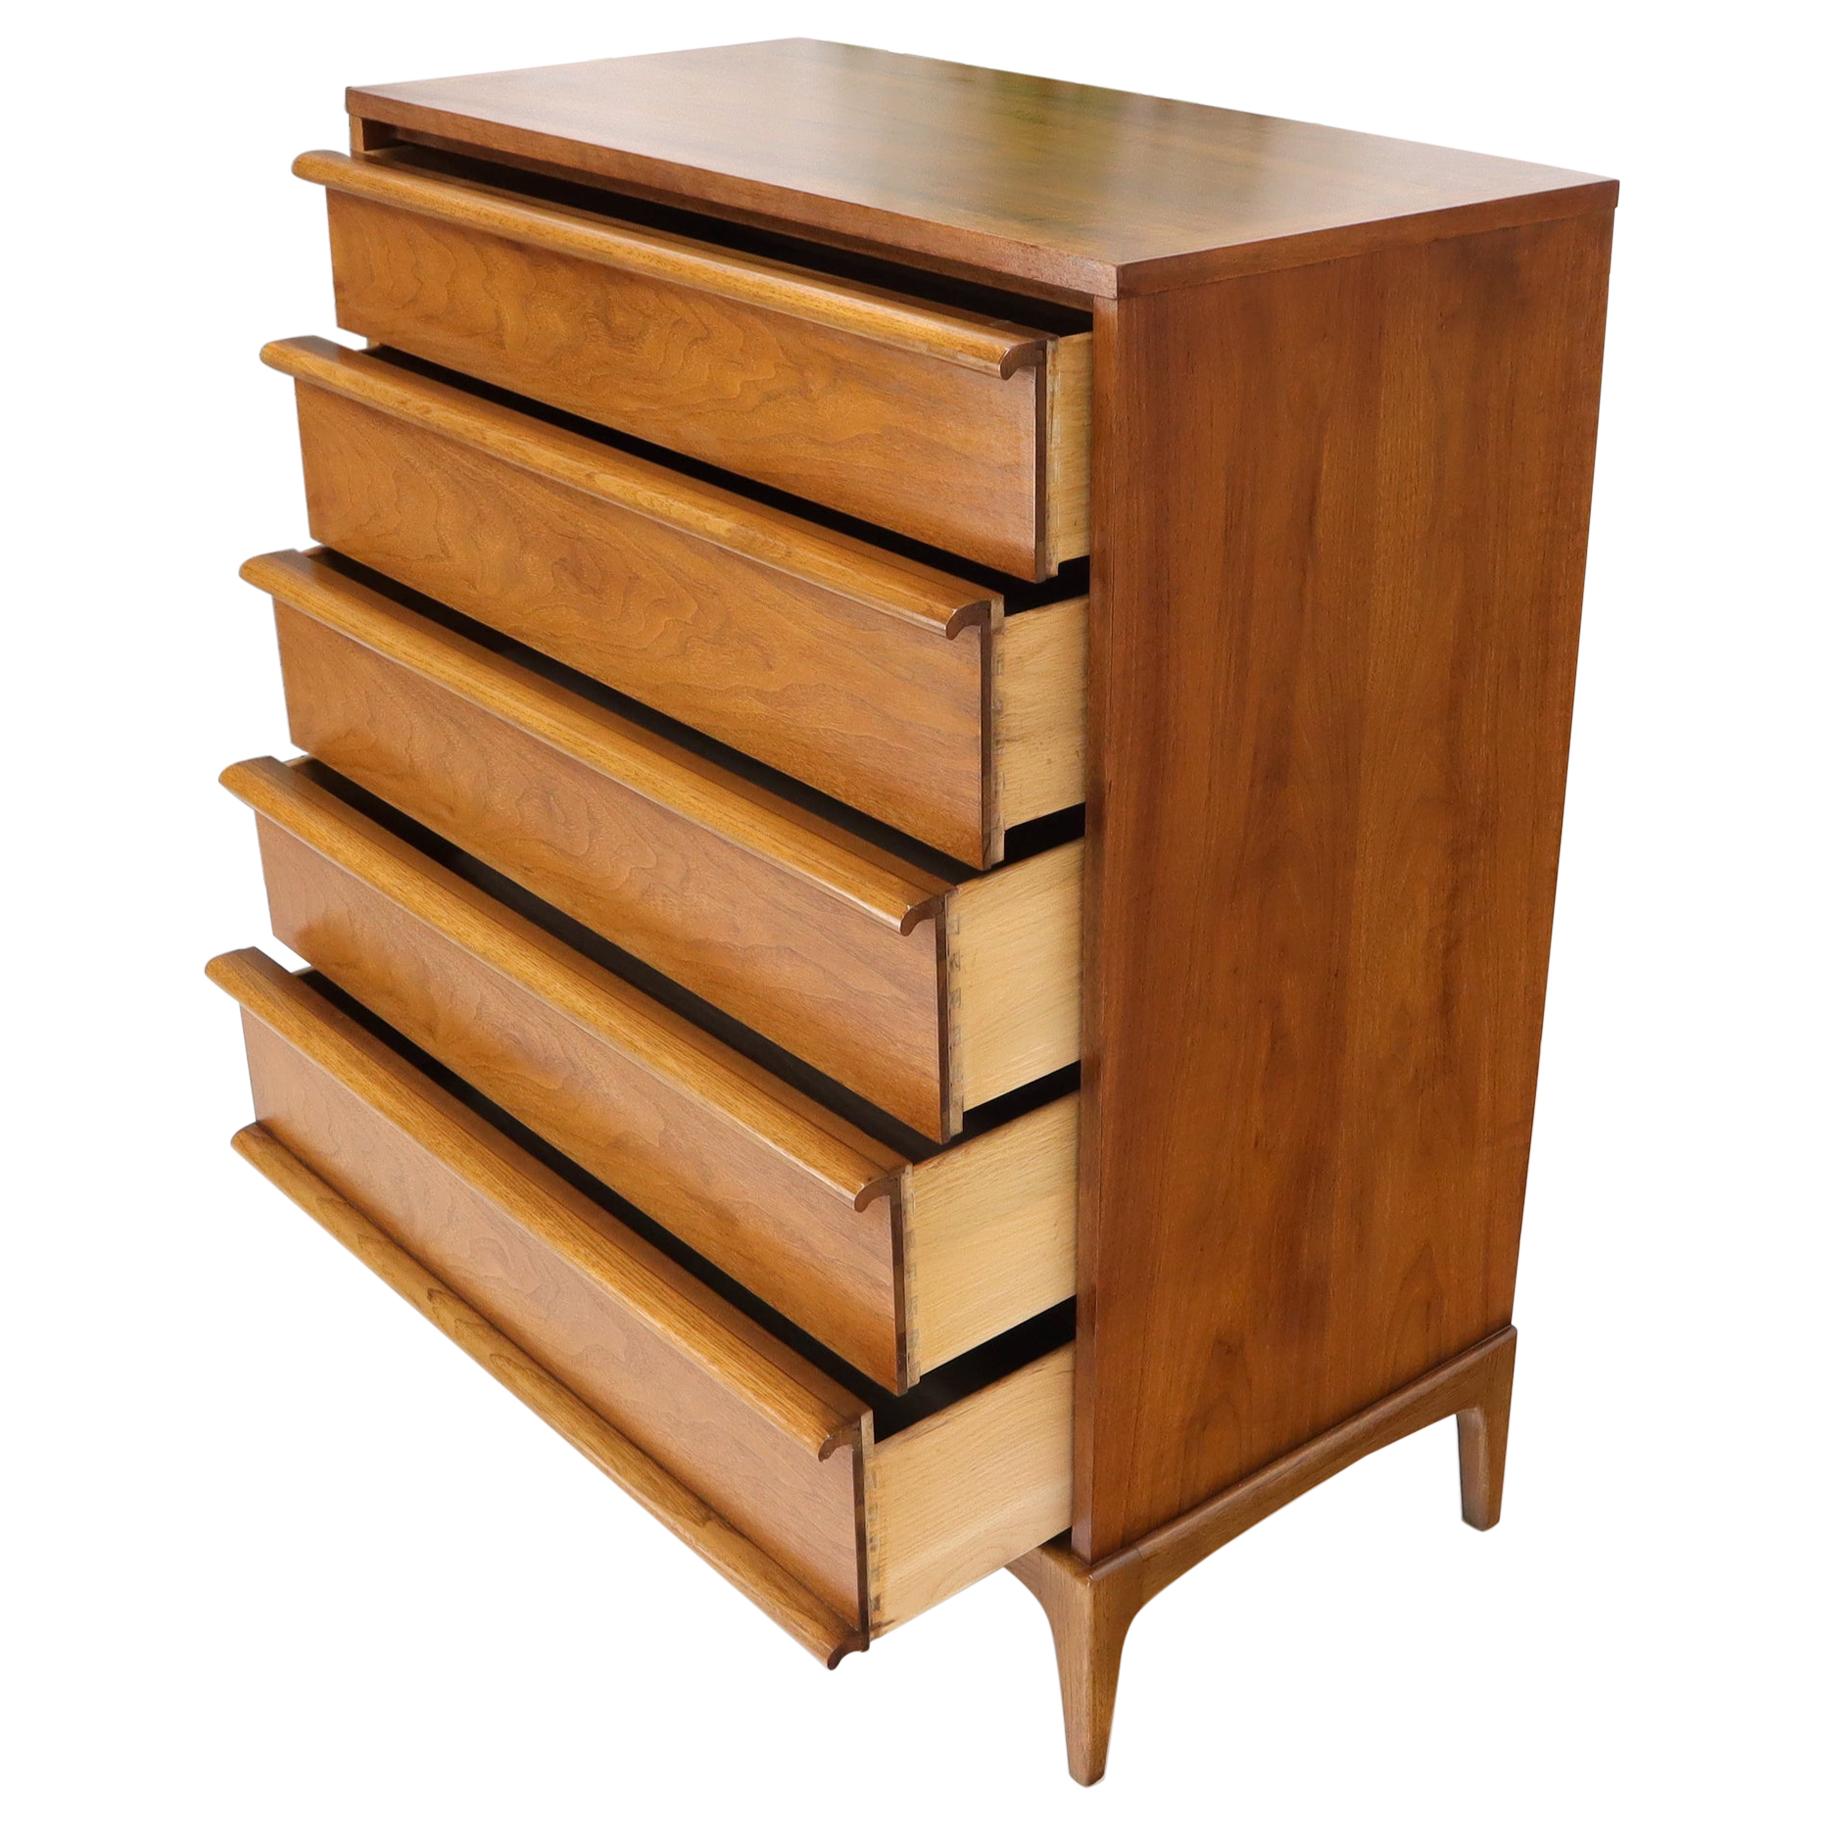 American Walnut High Chest Of Drawers, Cleaning Wood Dresser Drawers